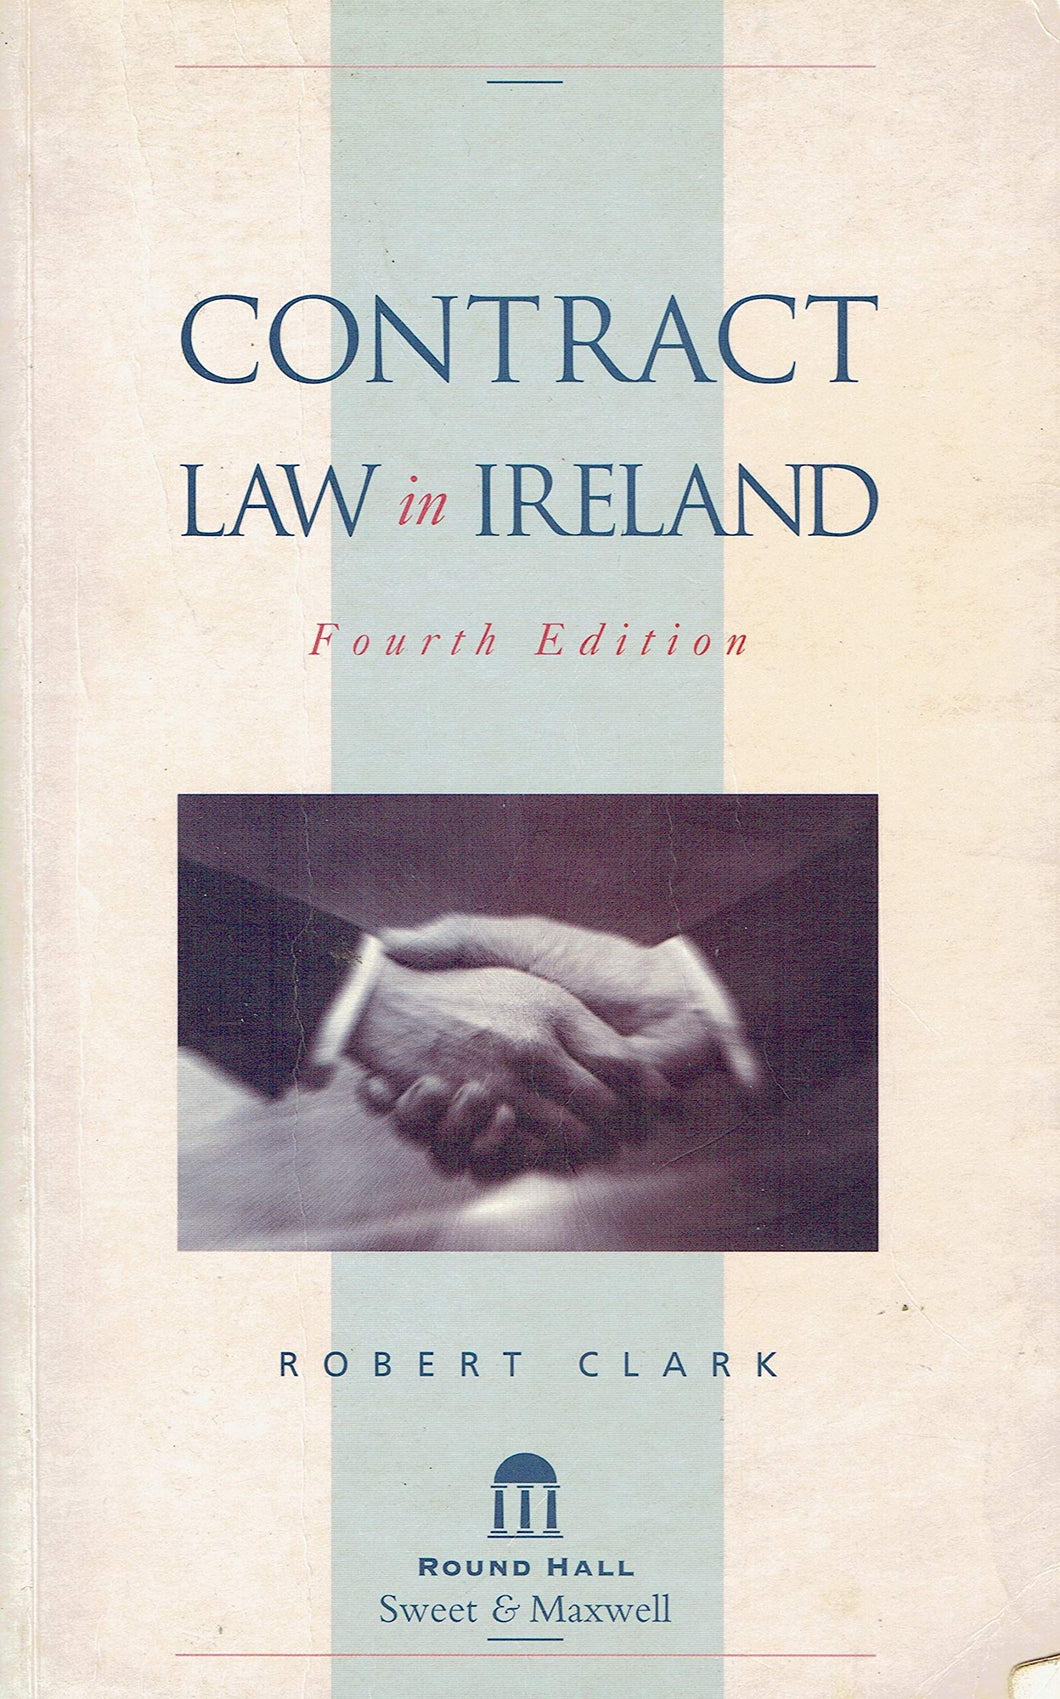 Contract Law in Ireland